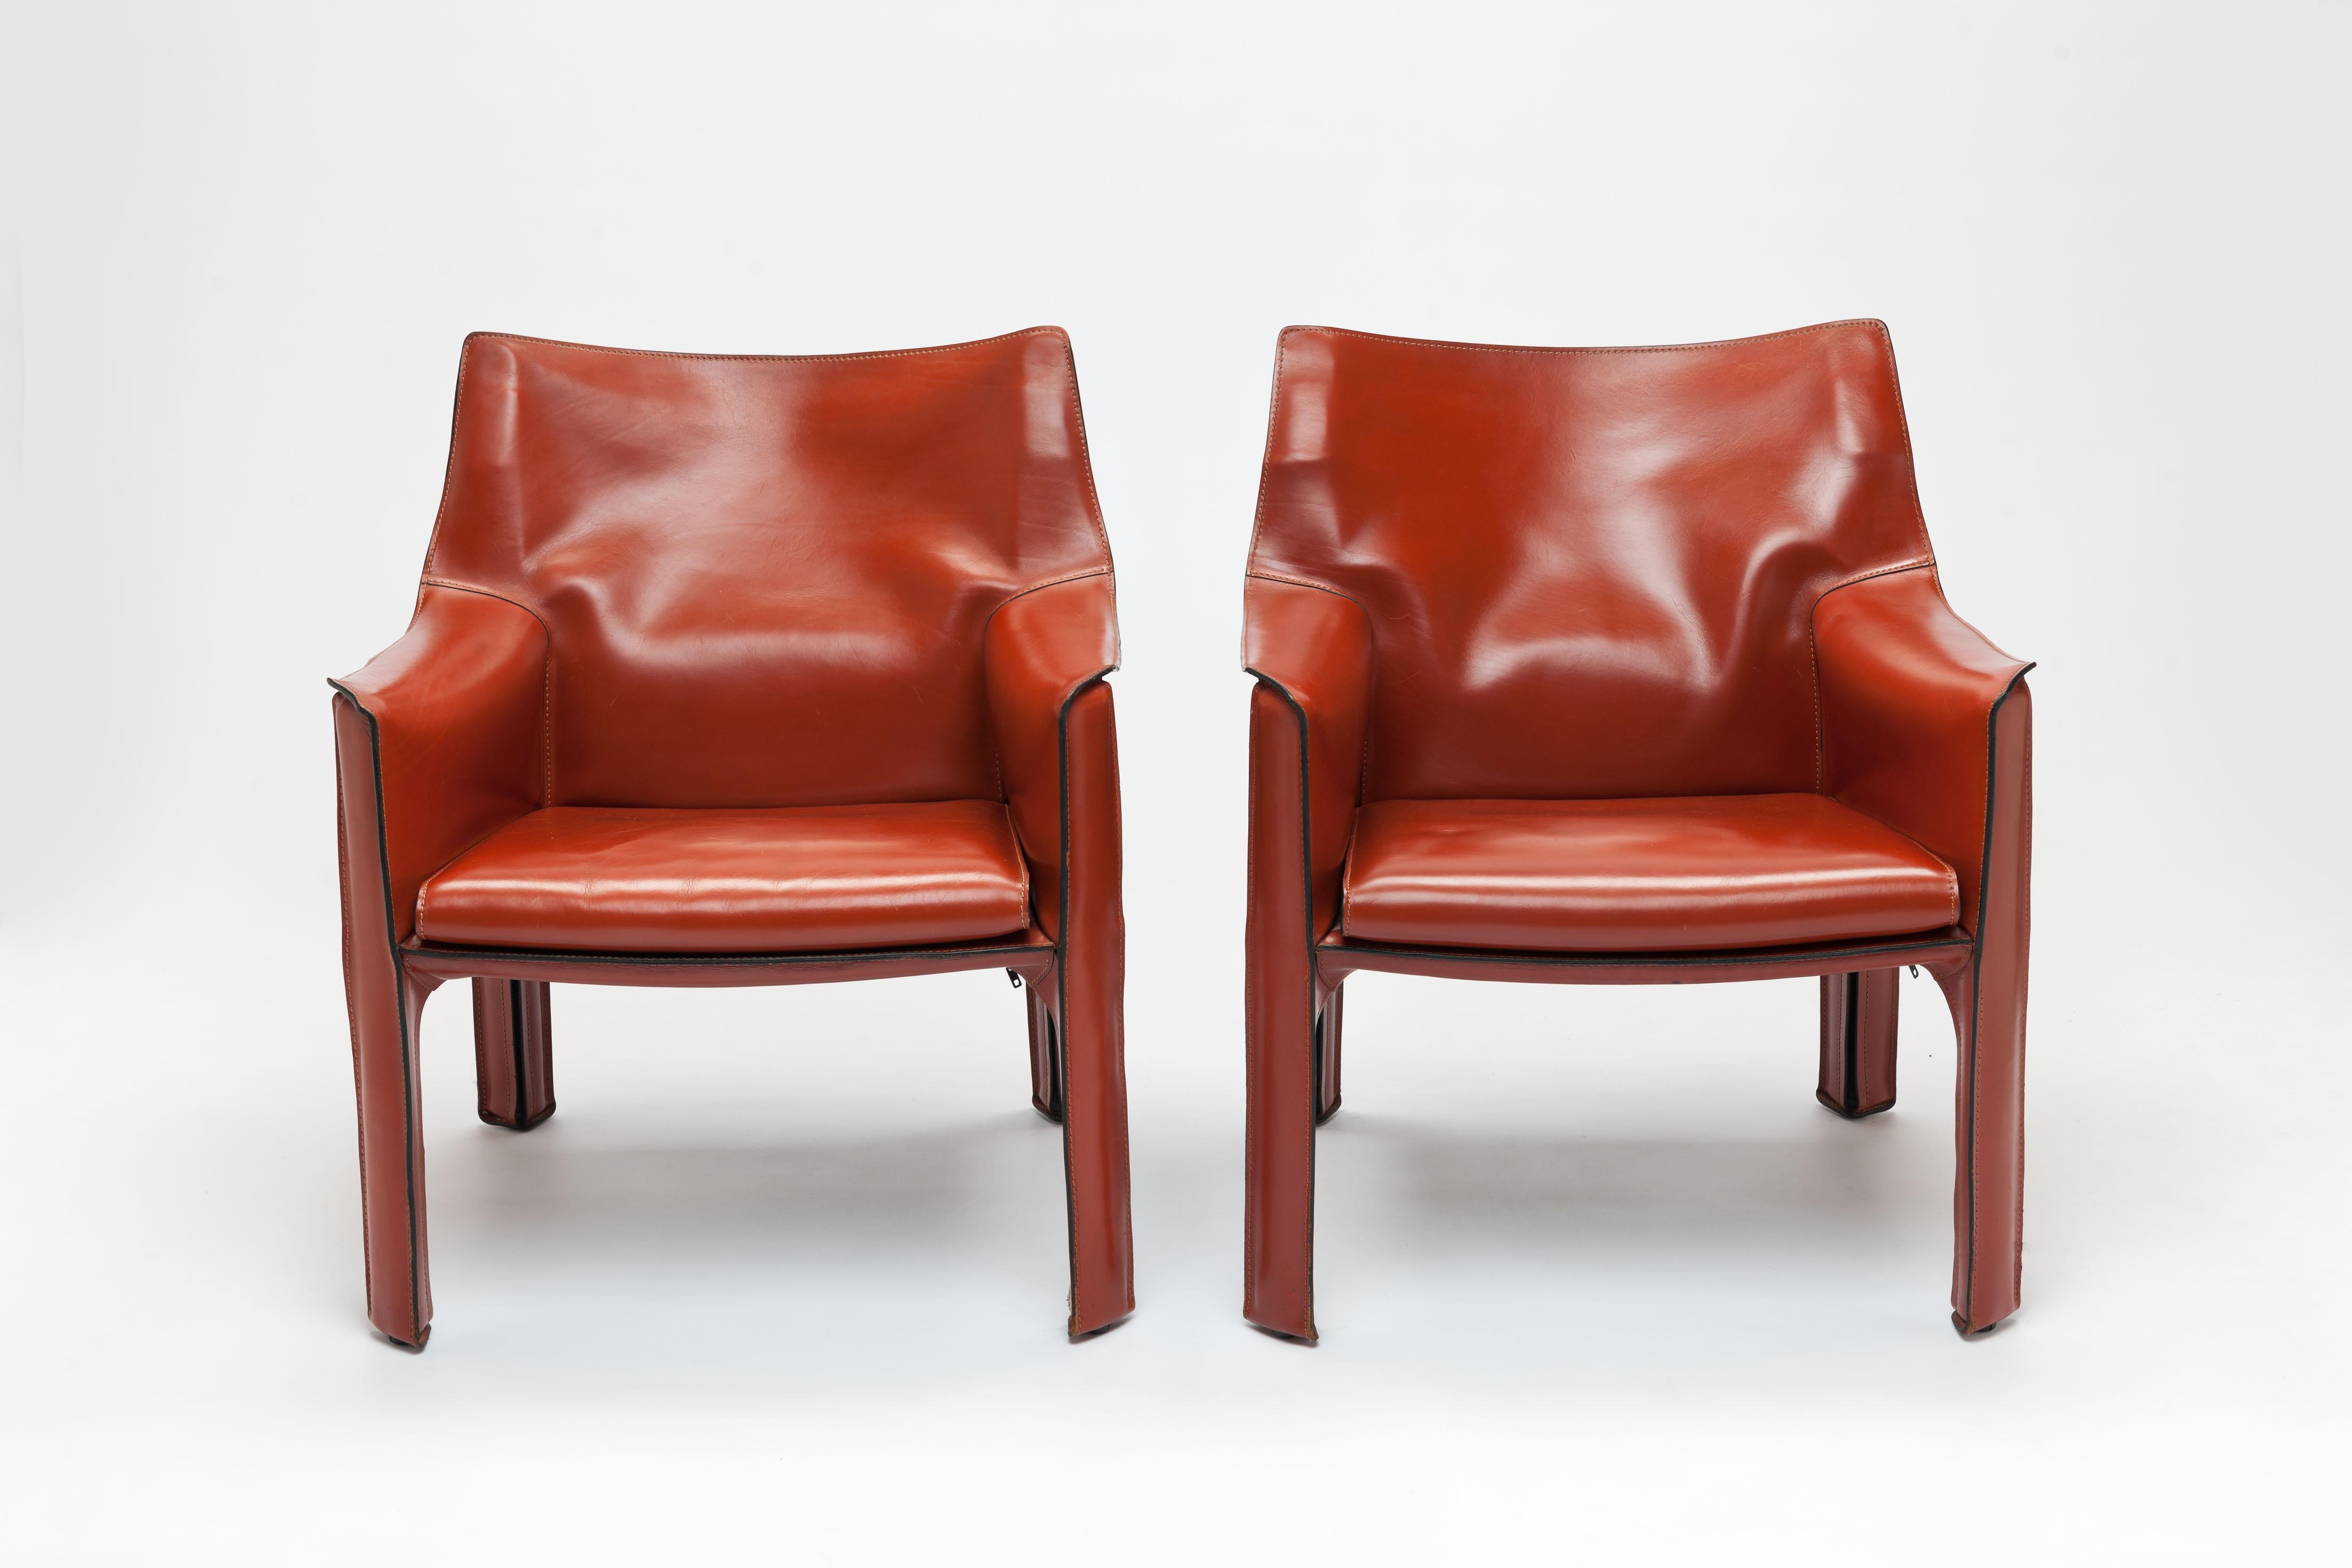 Pair of 1980s model CAB 414 lounge chairs by Mario Bellini for Cassina Italy.
Exceptional high-quality chairs consists of a leather cover stretched over a steel frame.
Bellini's innovation lay in using zips to fasten the leather cover to its